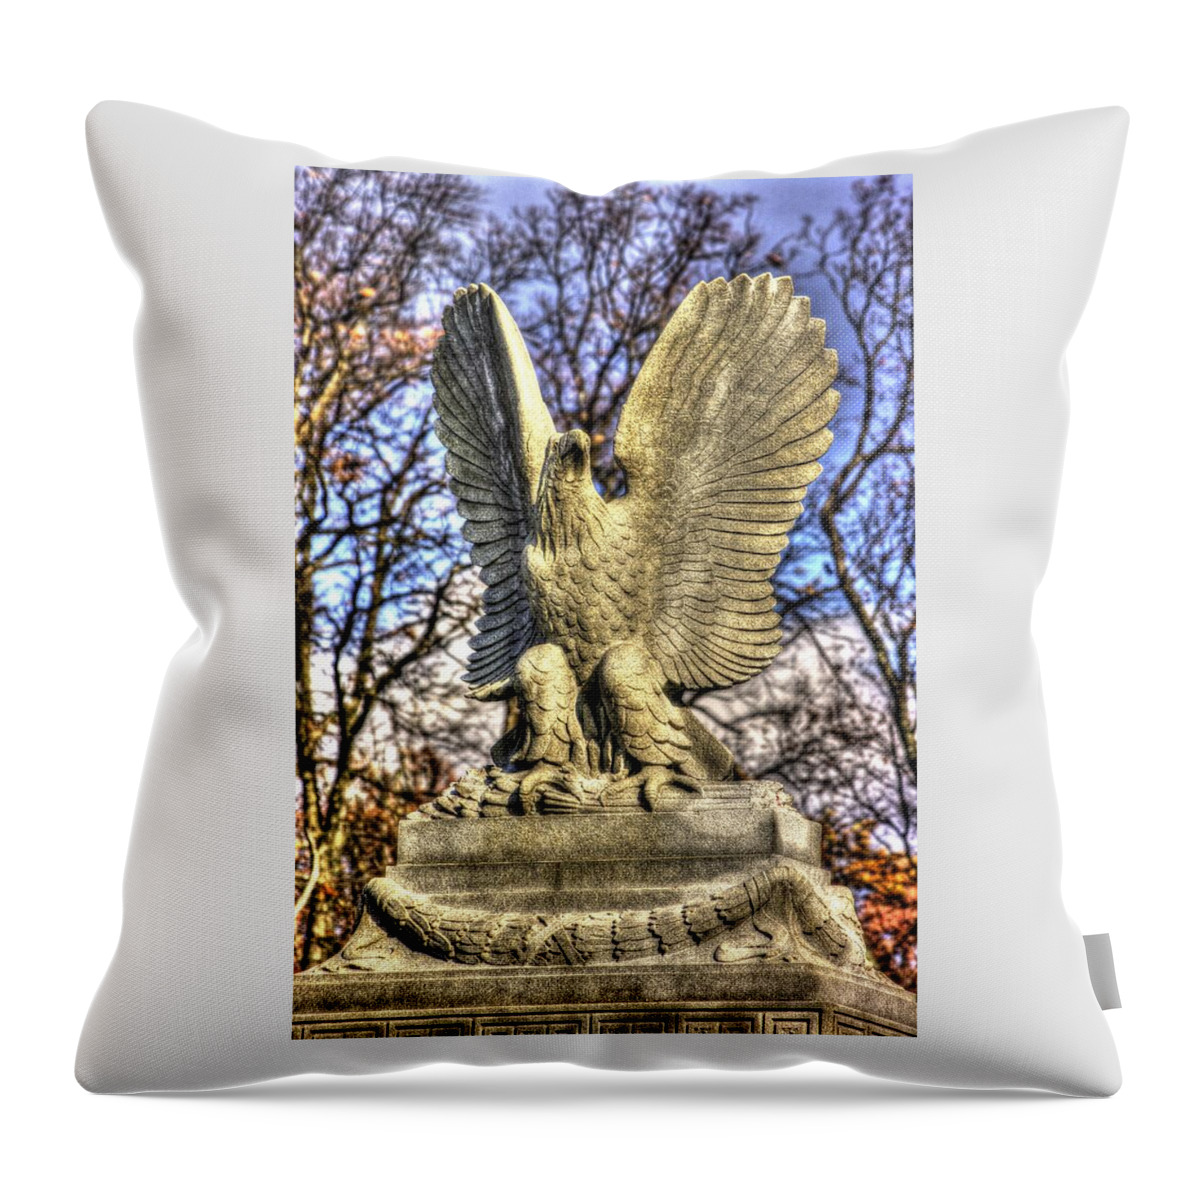 Civil War Throw Pillow featuring the photograph War Eagles - New York State Auxiliary Monument Hancock Avenue Gettysburg by Michael Mazaika